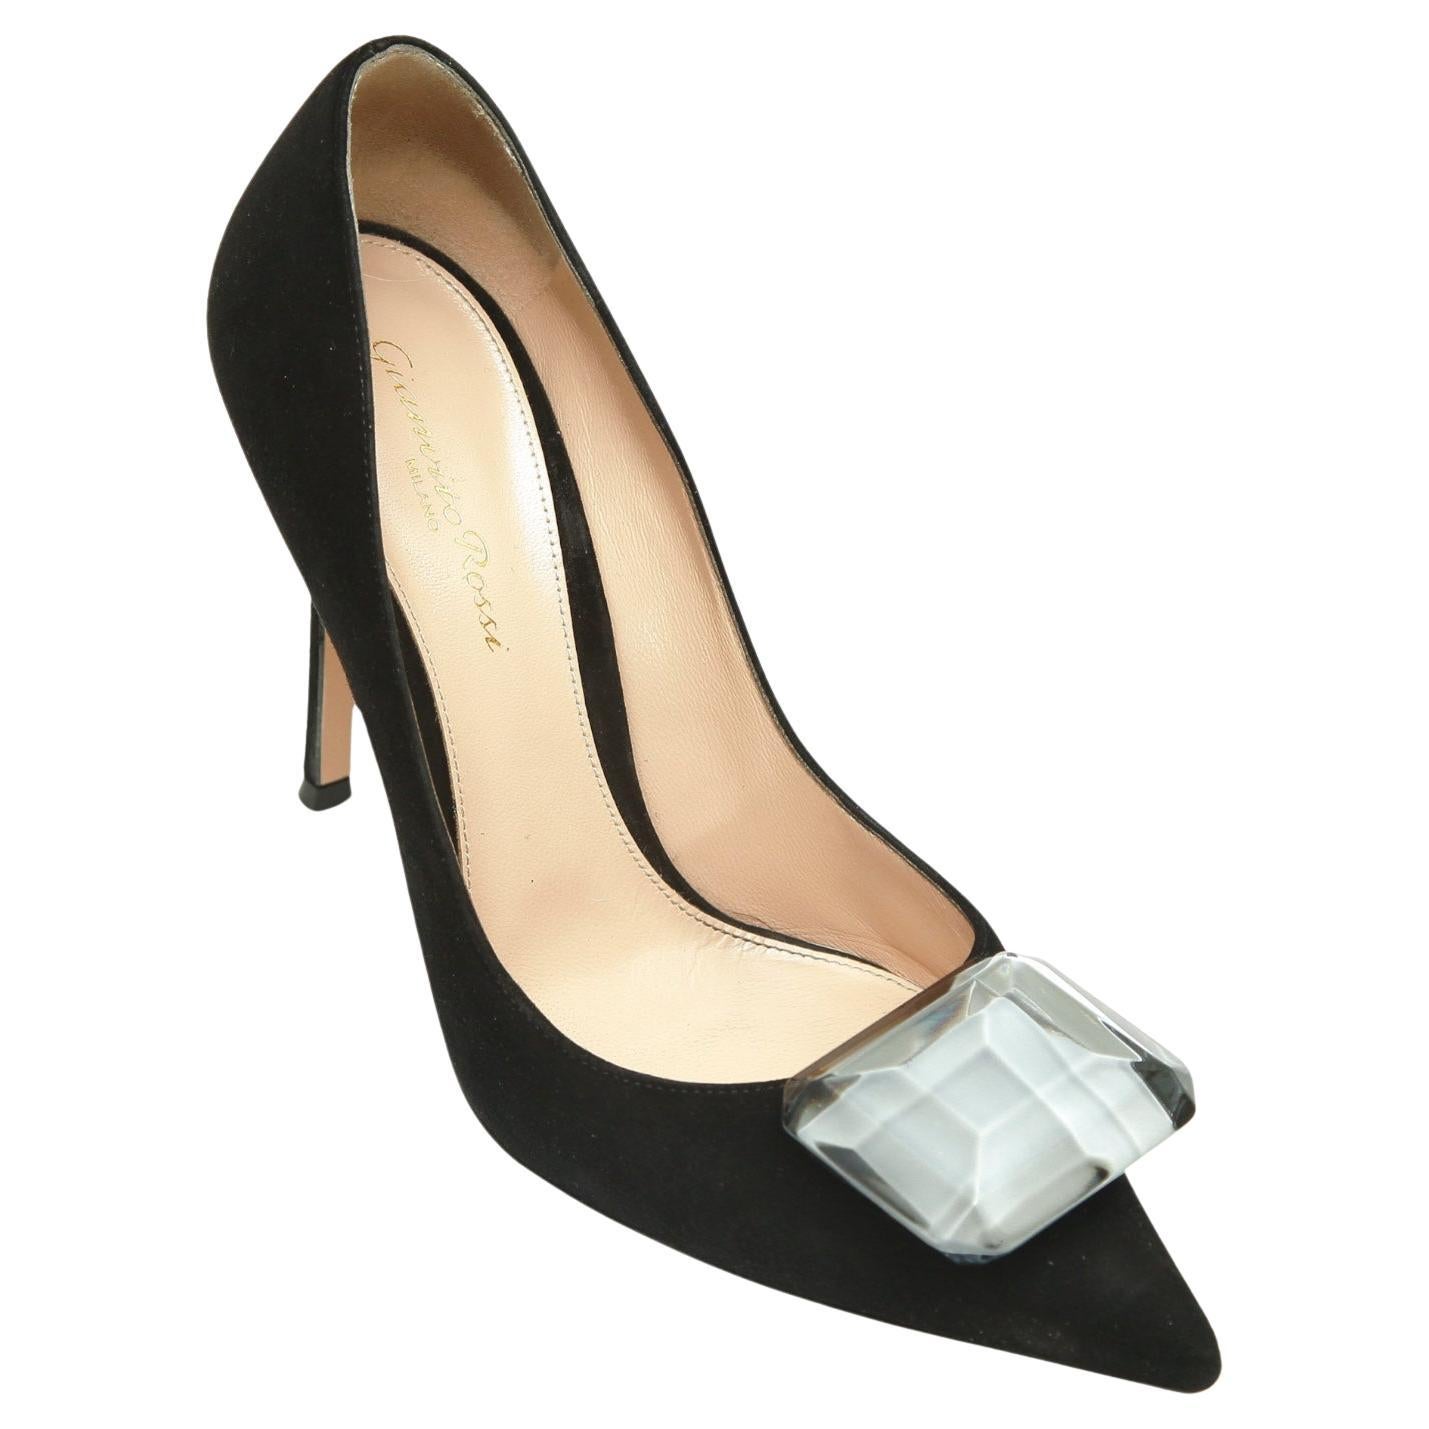 GIANVITO ROSSI Black Suede Leather Pump JAIPUR Crystal Pointed Toe 38 $1200 For Sale